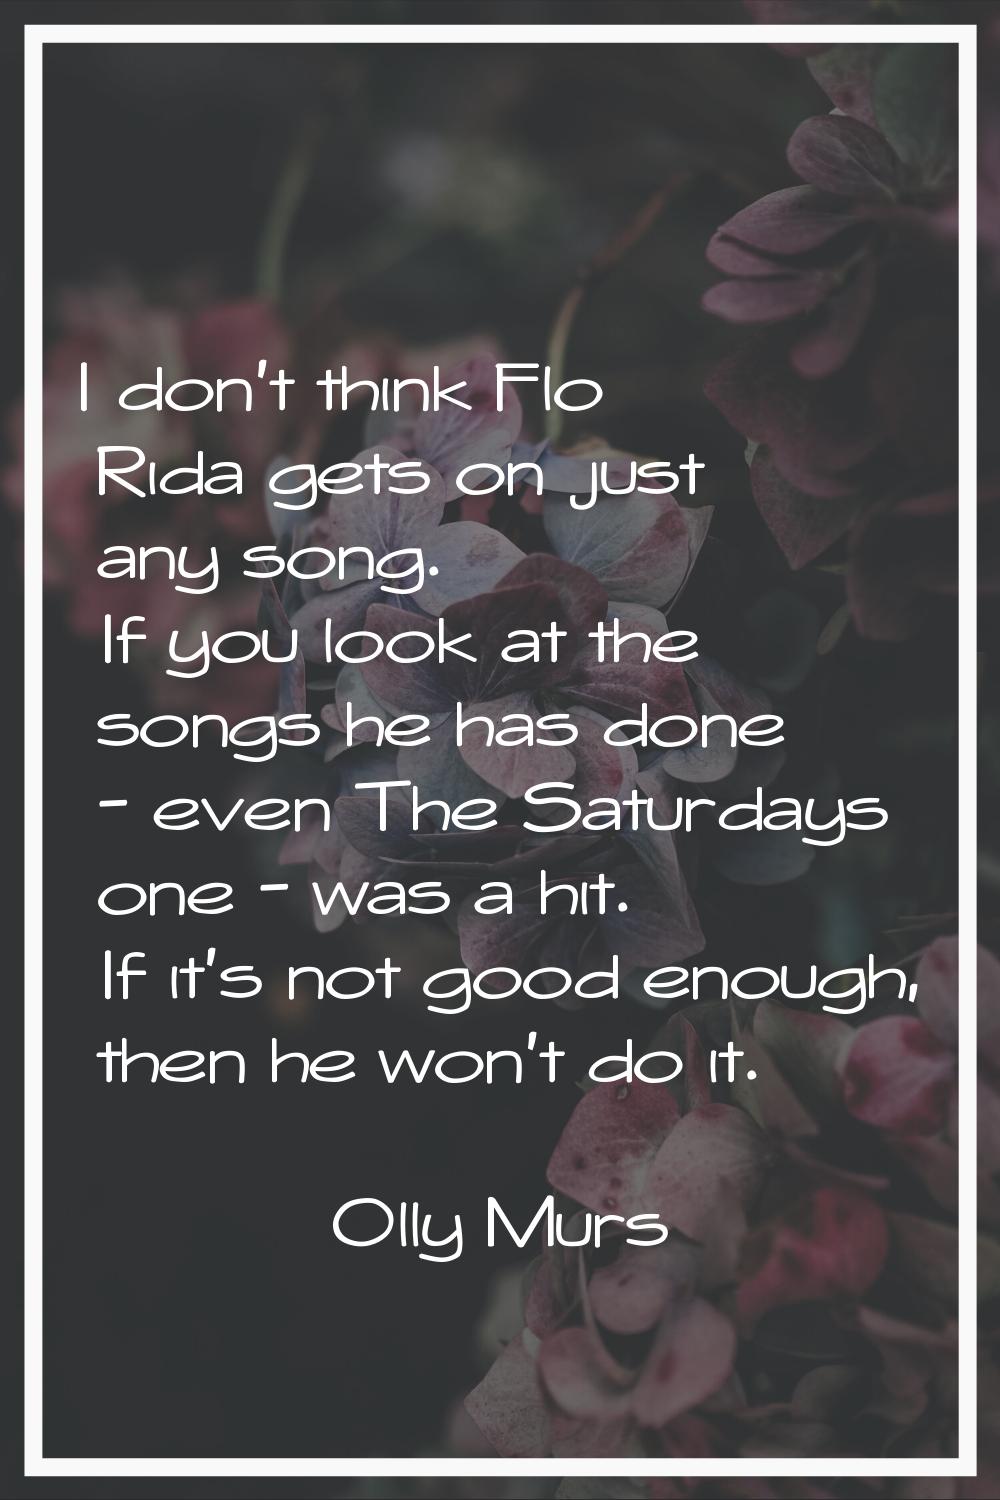 I don't think Flo Rida gets on just any song. If you look at the songs he has done - even The Satur